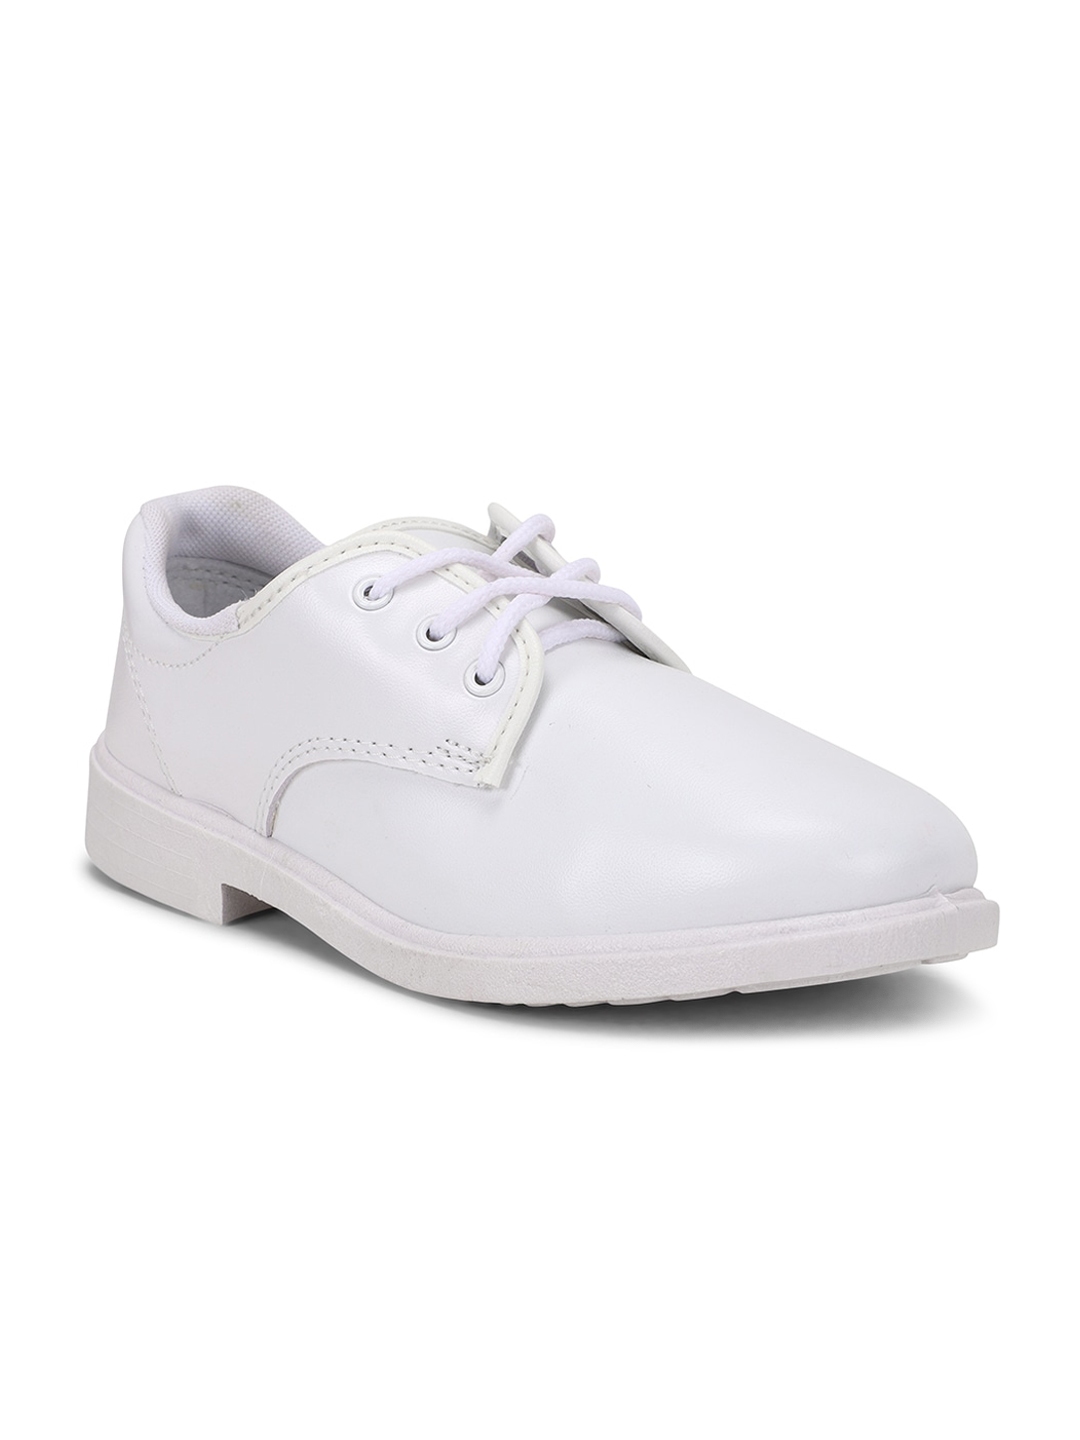 Buy Bata Girls White Synthetic Derbys School Shoes - Casual Shoes for ...